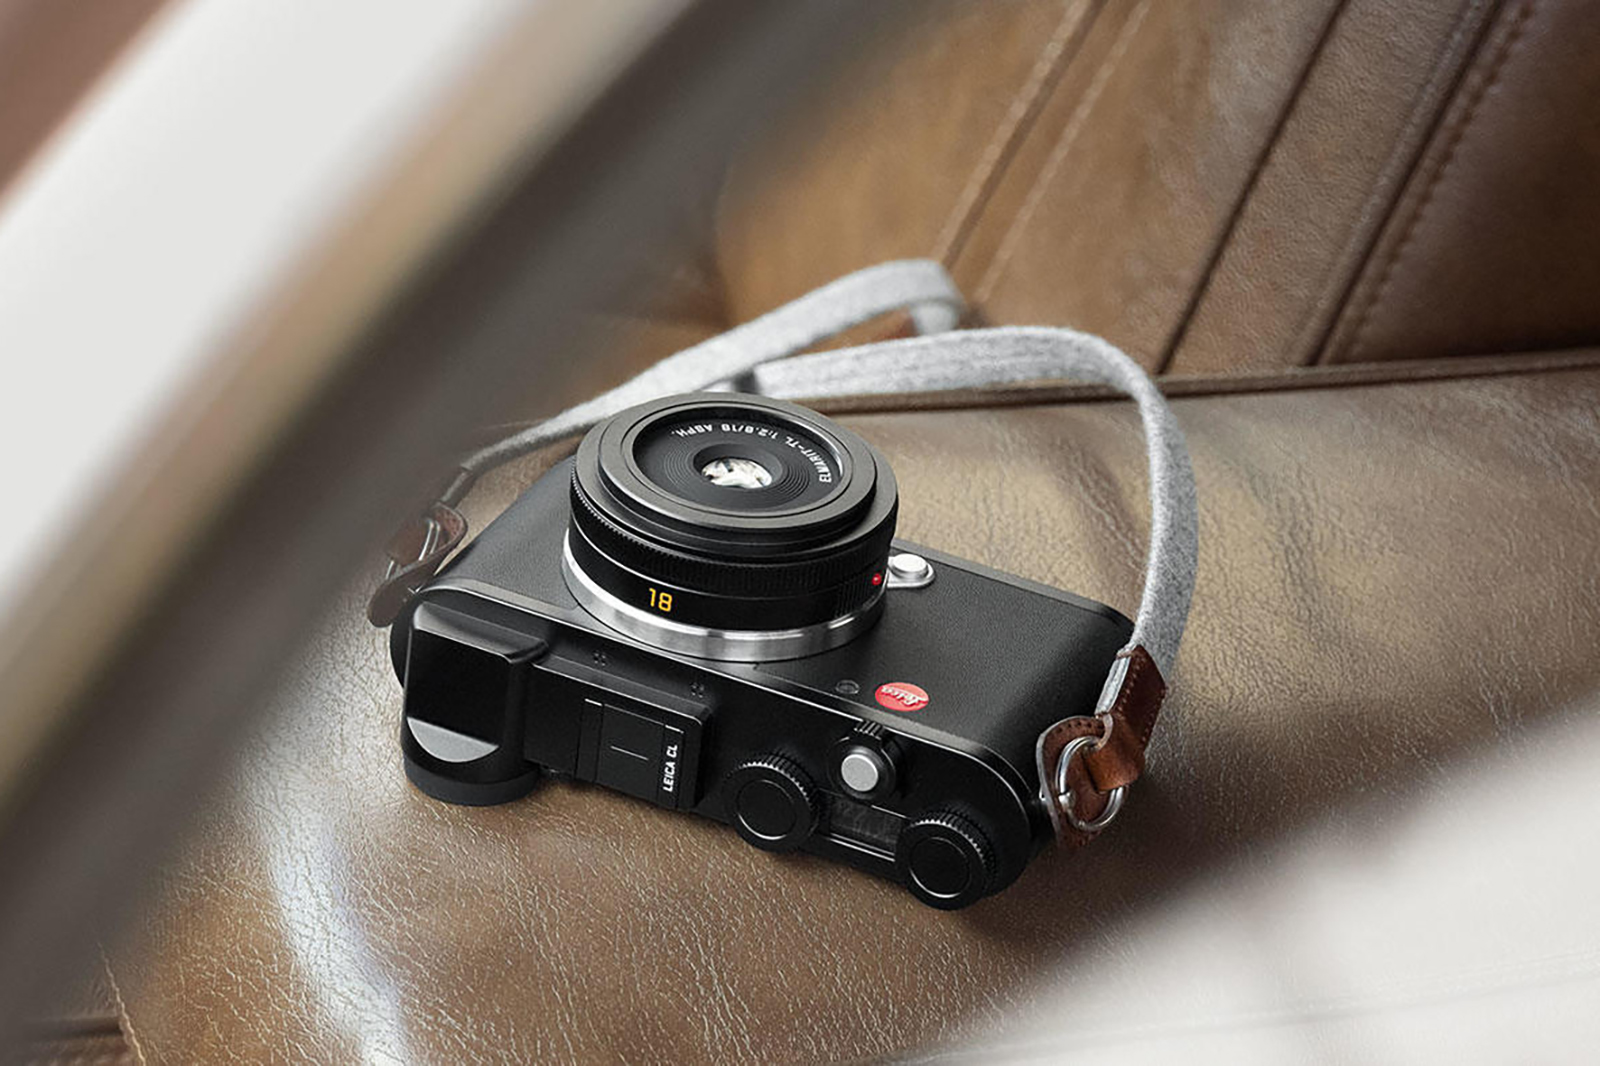 The Leica CL is a Reimagined '70s Rangefinder With Digital Guts